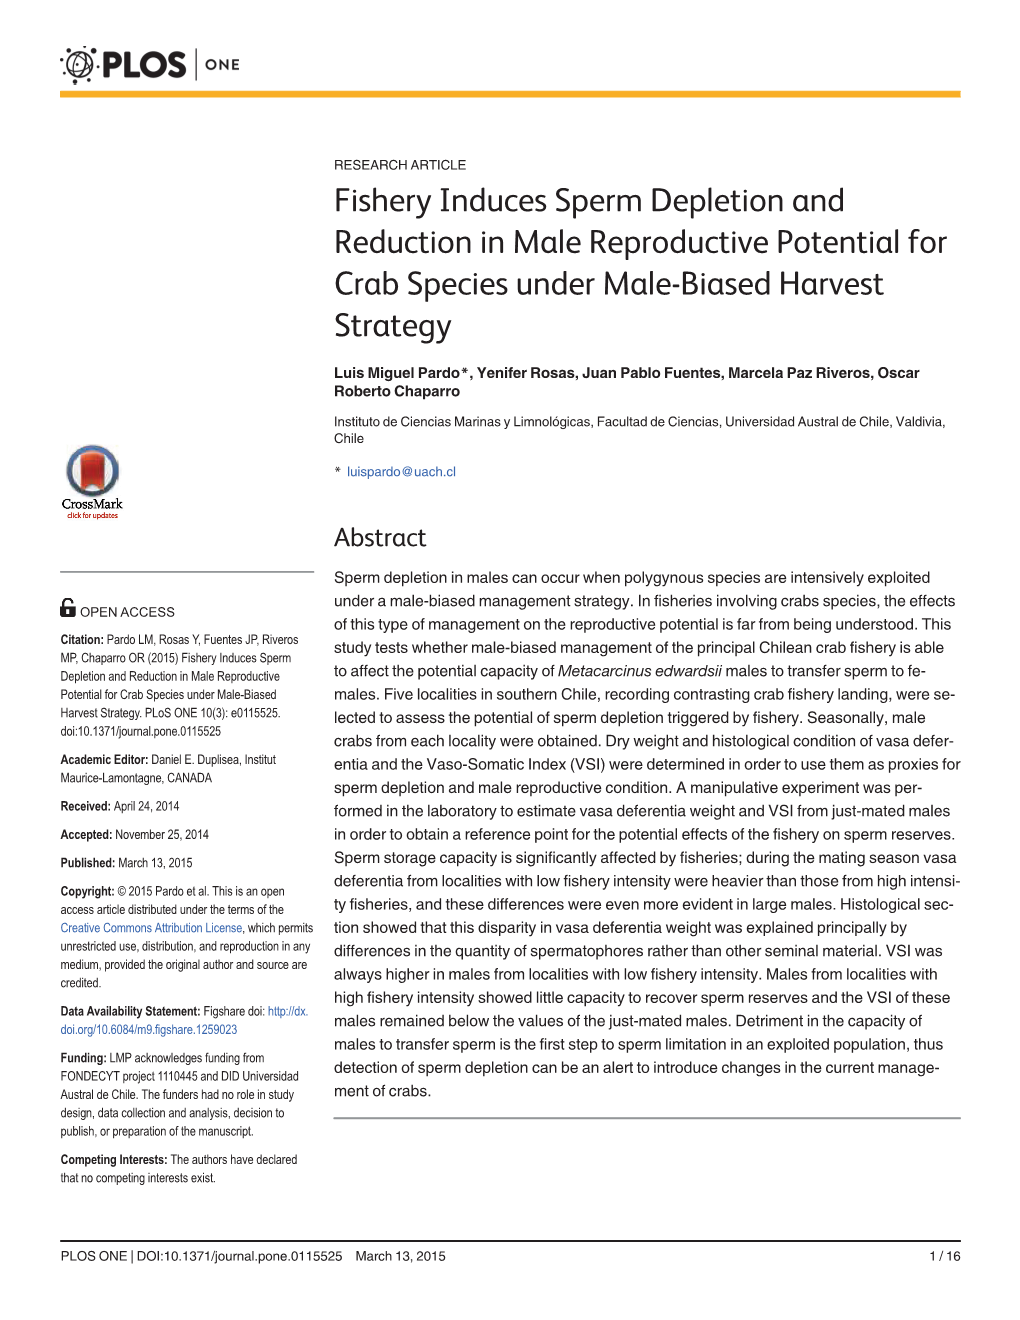 Fishery Induces Sperm Depletion and Reduction in Male Reproductive Potential for Crab Species Under Male-Biased Harvest Strategy